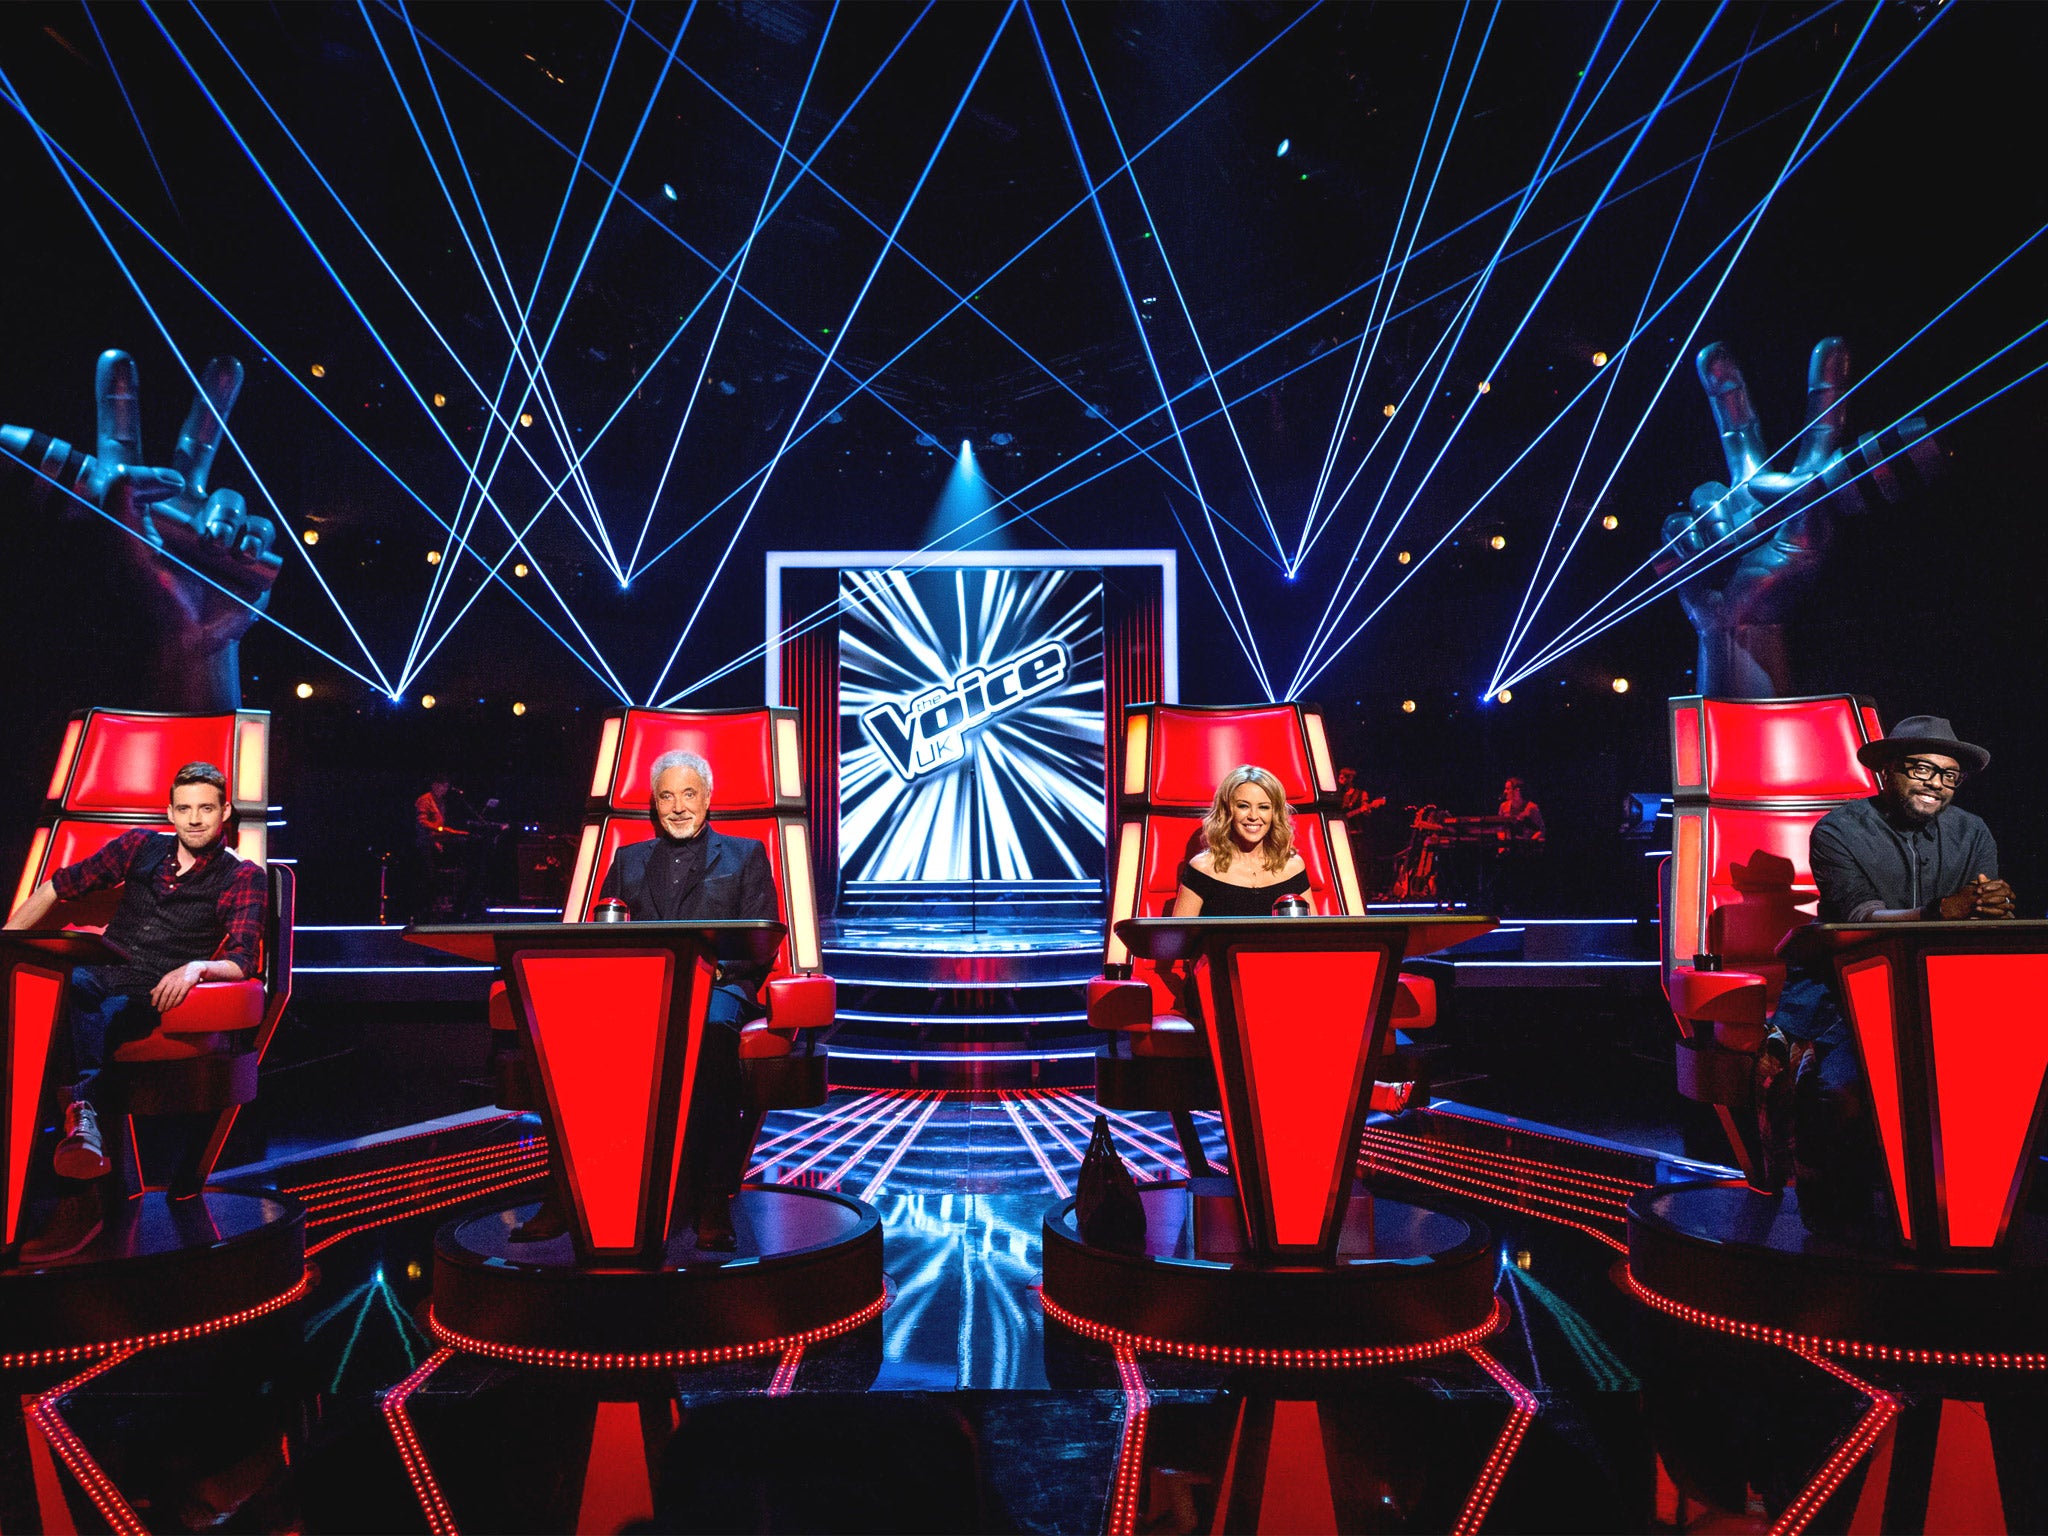 The new series of 'The Voice' got underway last weekend